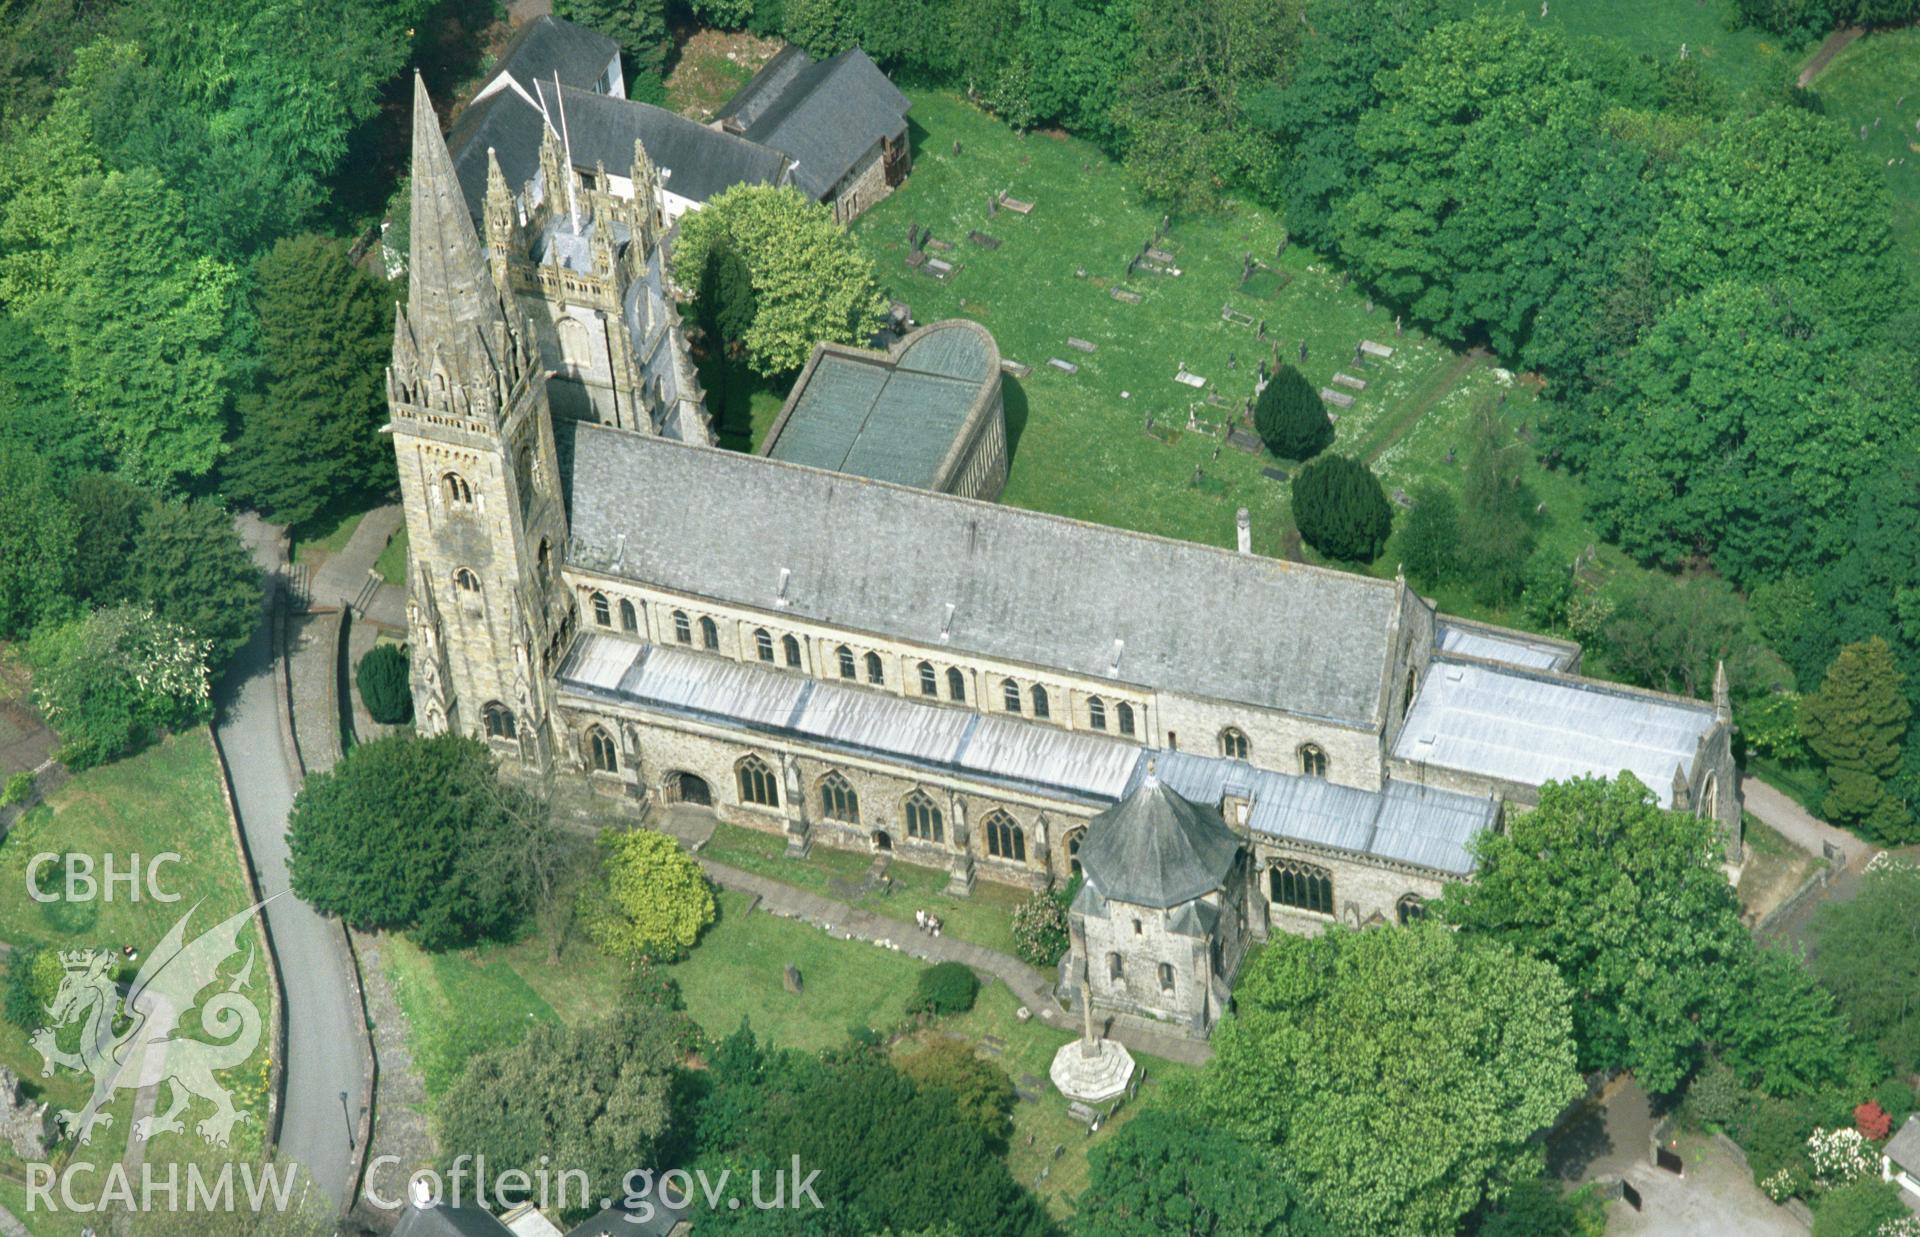 RCAHMW colour oblique aerial photograph of Llandaff Cathedral, low level view. Taken by Toby Driver on 16/05/2002